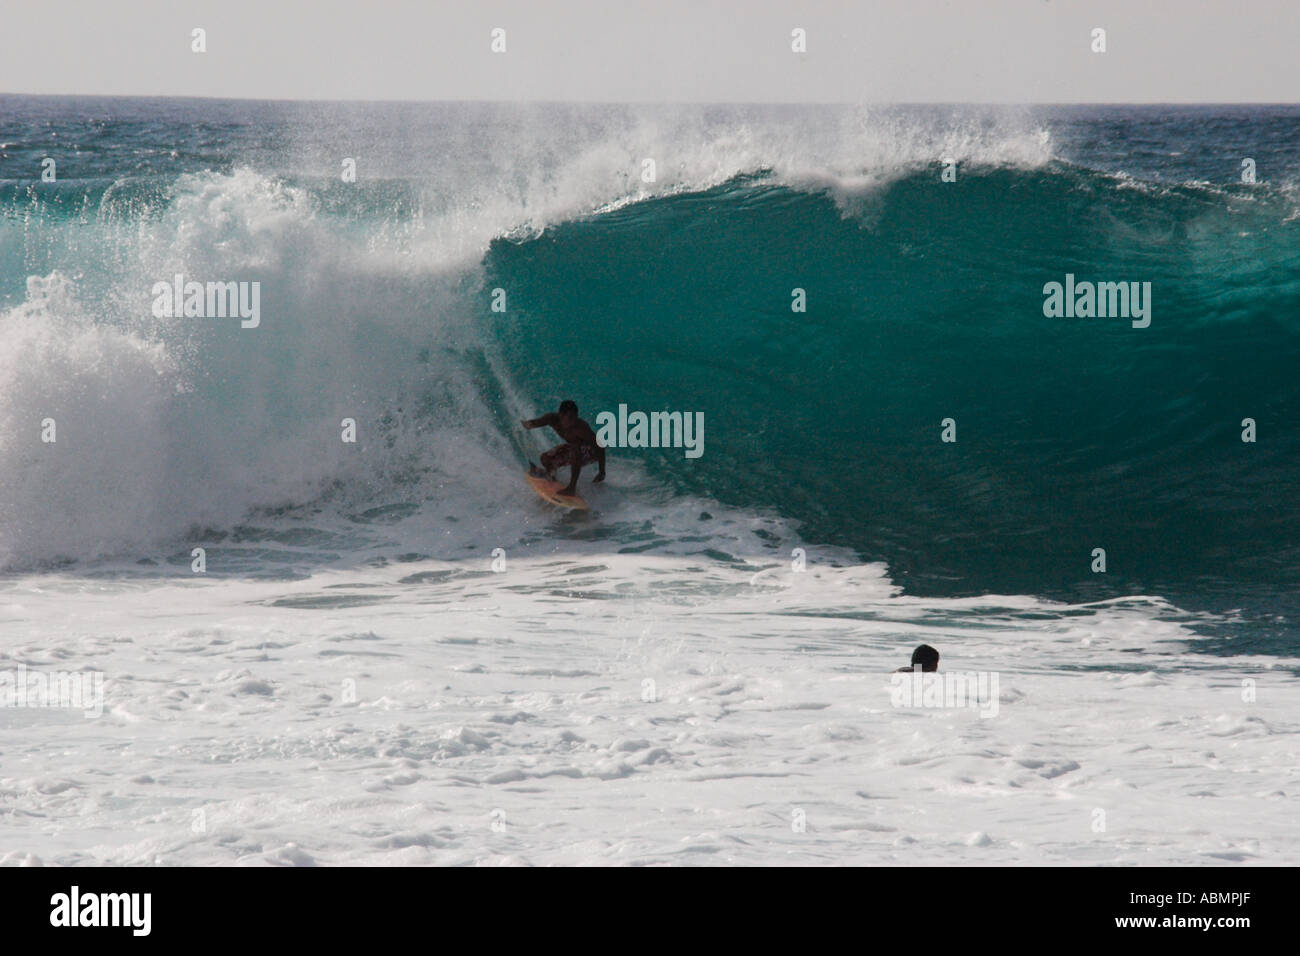 Surfer riding a wave in Pipeline beach world s surfing mecca North Shore Oahu Hawaii Pacific Stock Photo